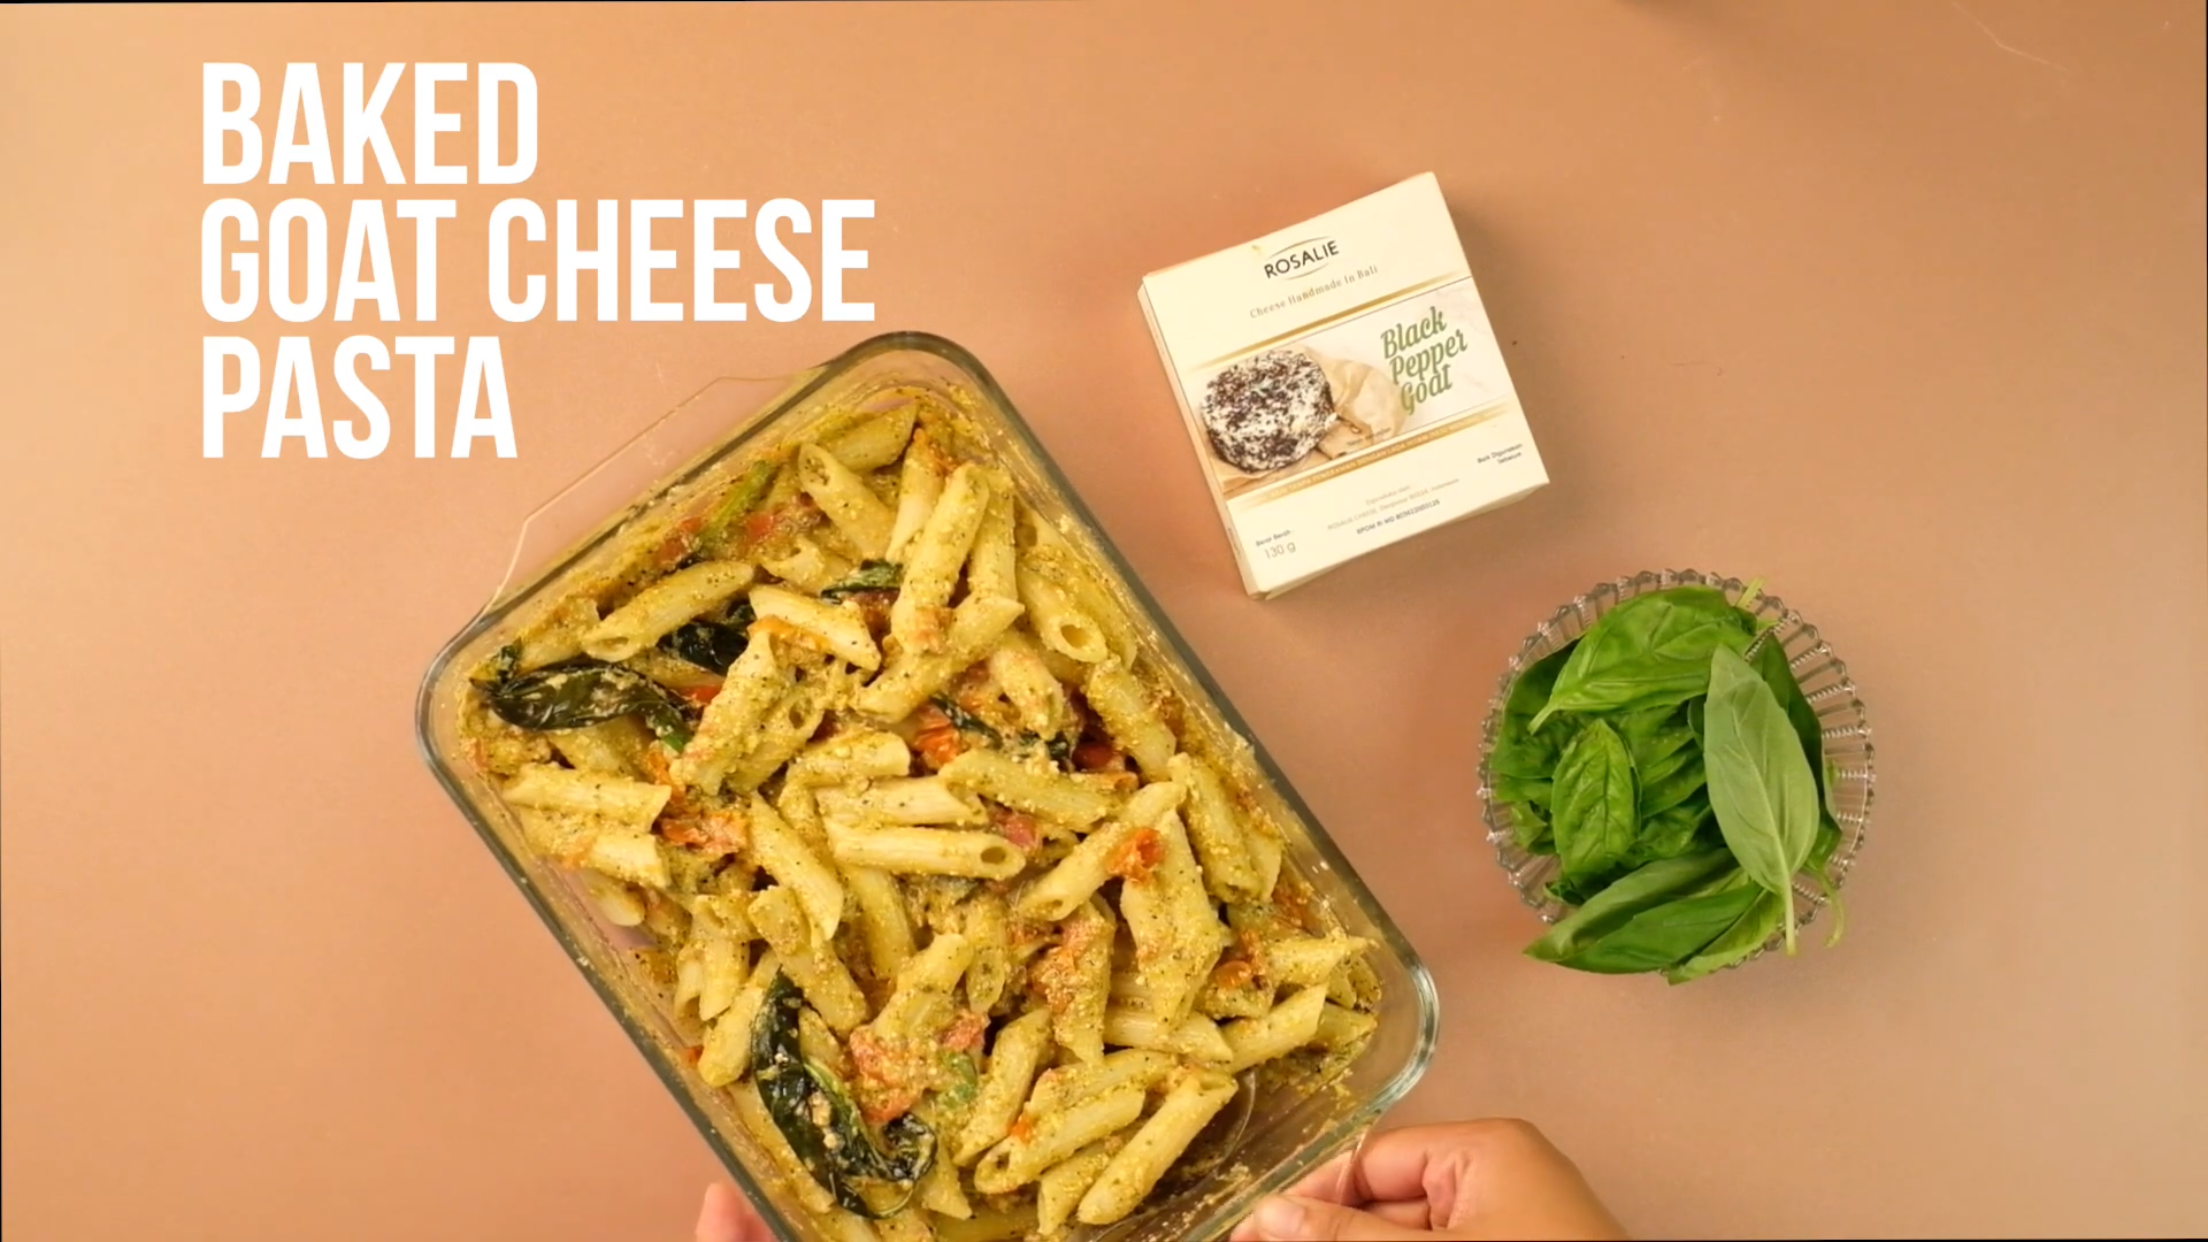 Baked Goat Cheese Pasta image